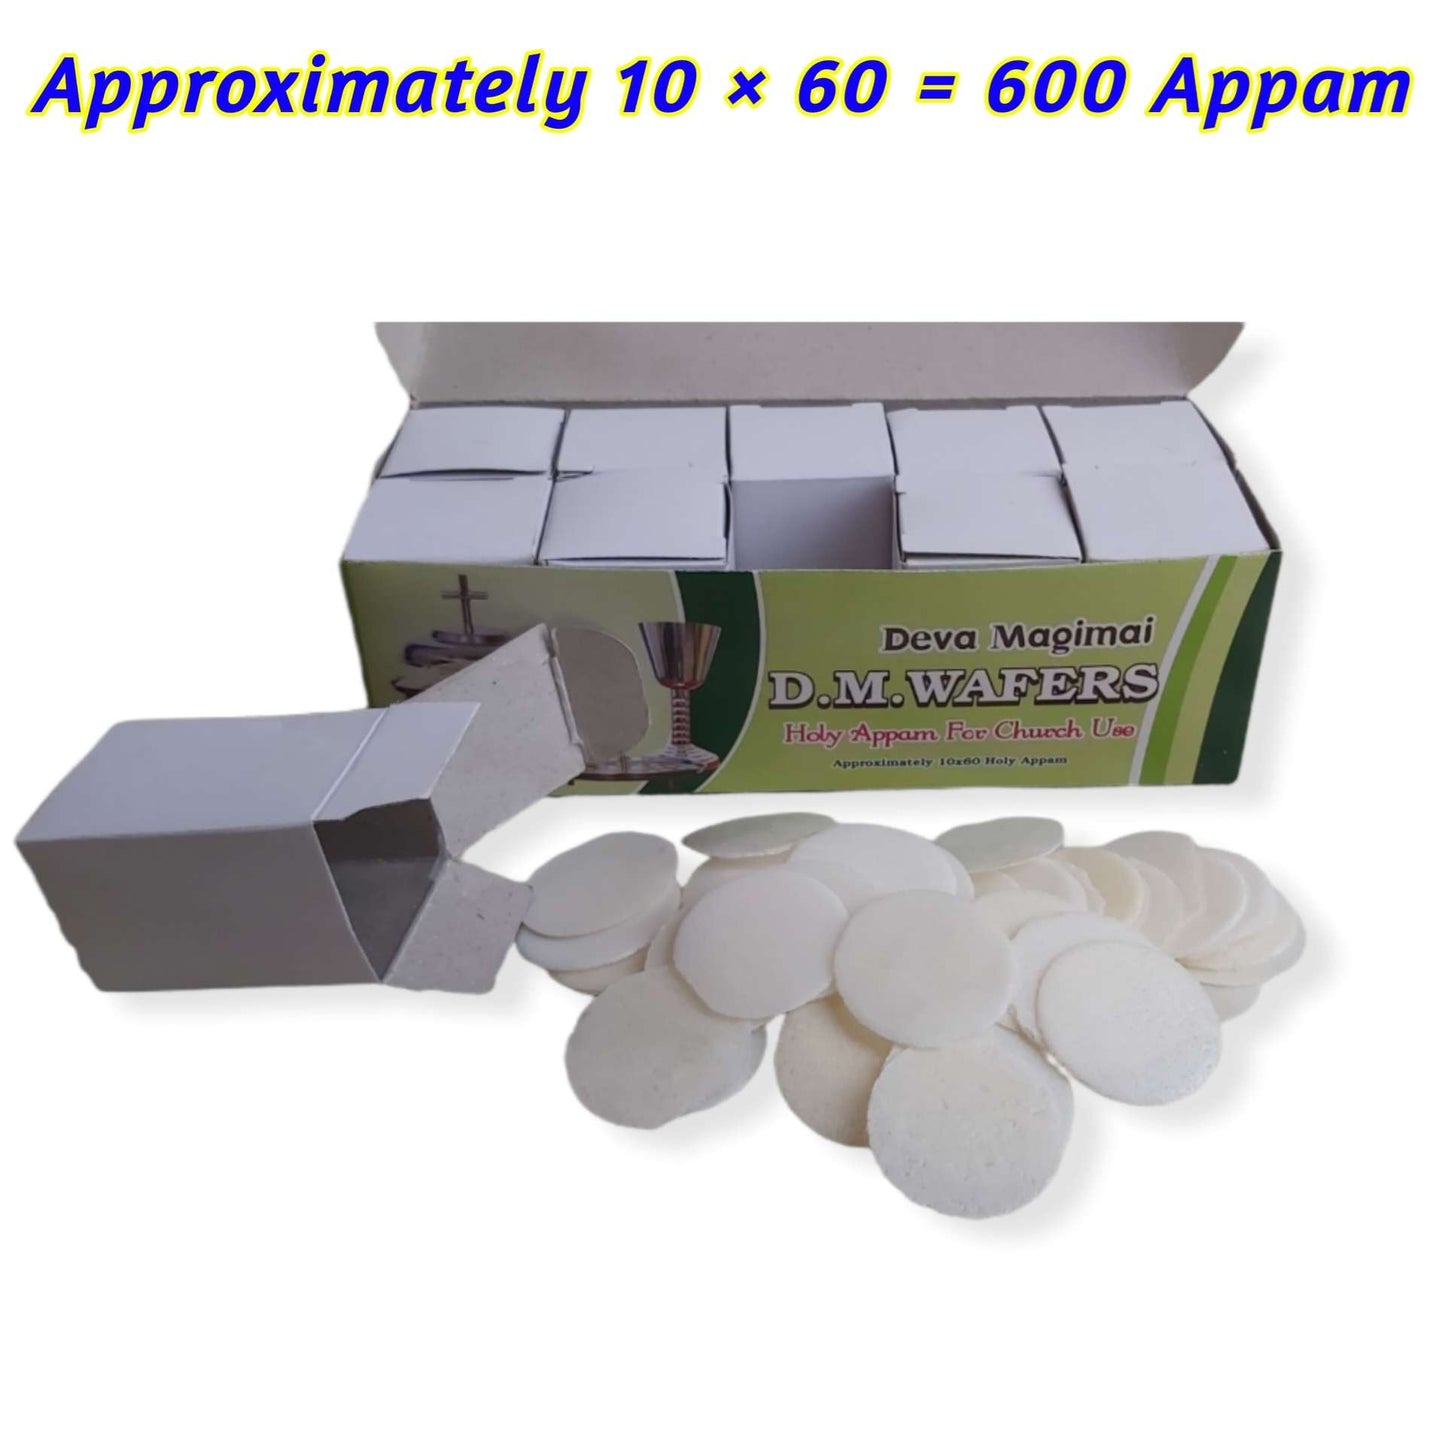 The Holy Communion Wafers | Communion Bread | 600 Appam